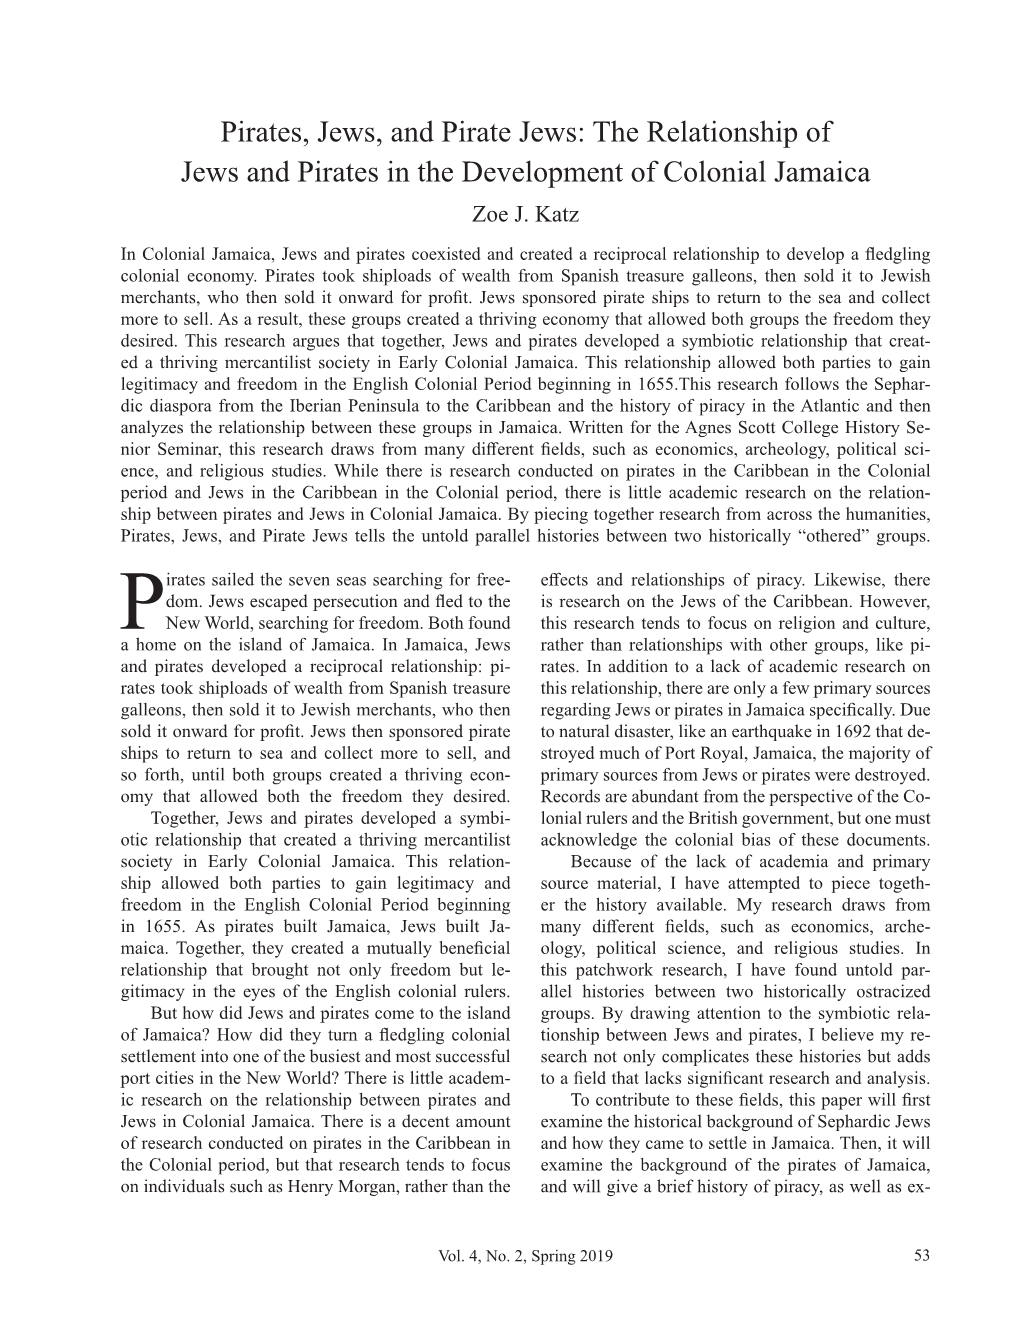 The Relationship of Jews and Pirates in the Development of Colonial Jamaica Zoe J